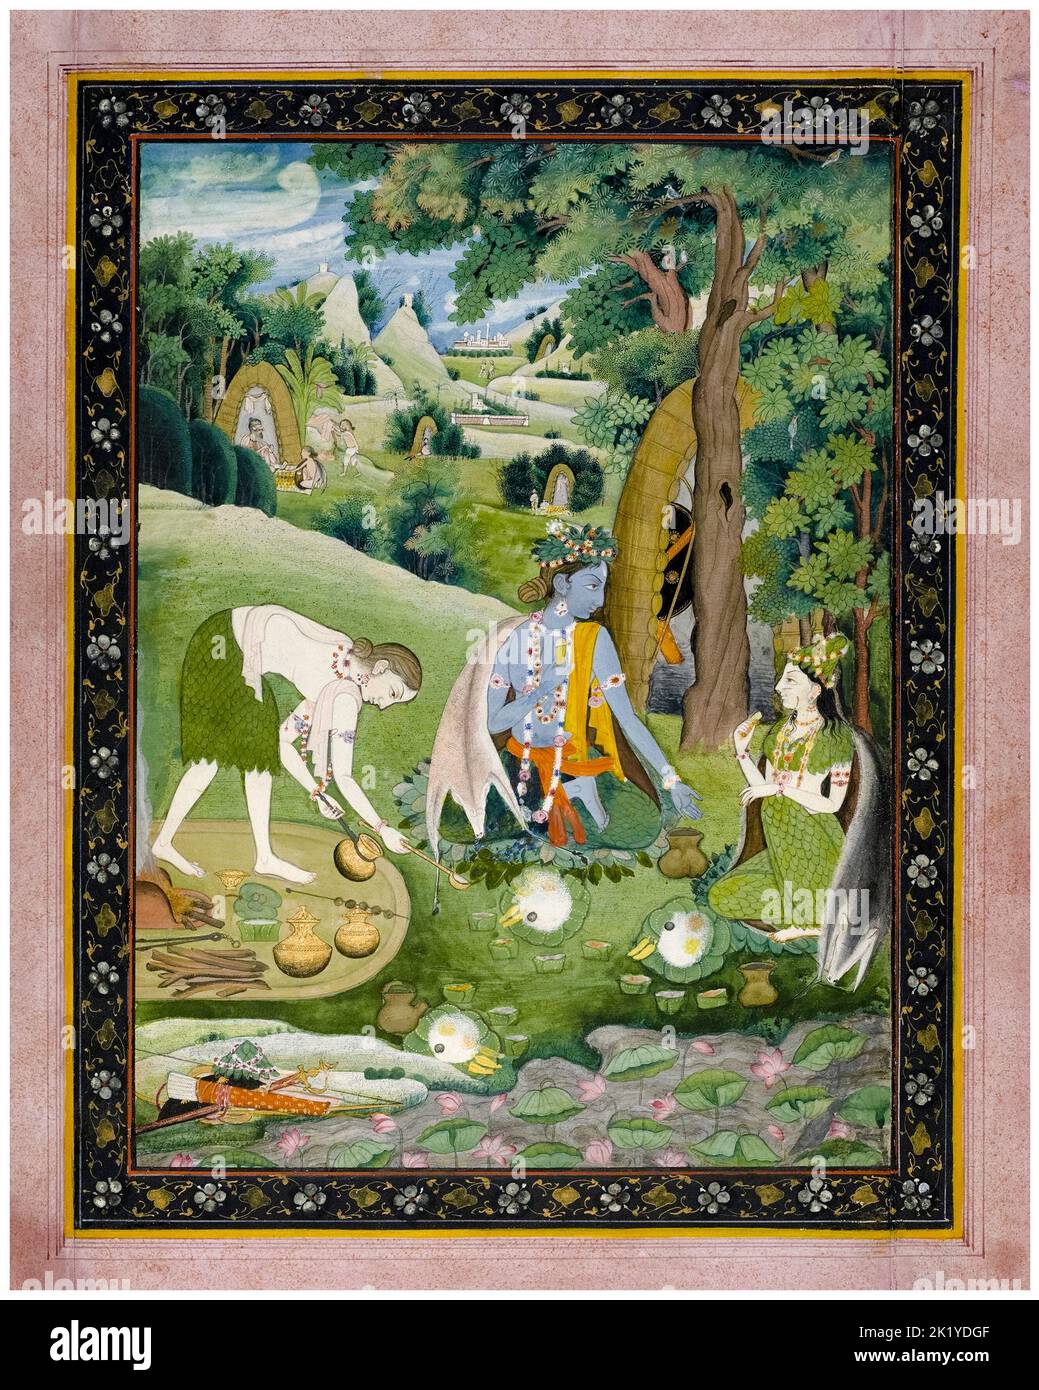 Rama, Lakshmana, and Sita, Cooking and Eating in the Wilderness, painting in gouache and gold on paper by unknown Indian artist, circa 1820 Stock Photo